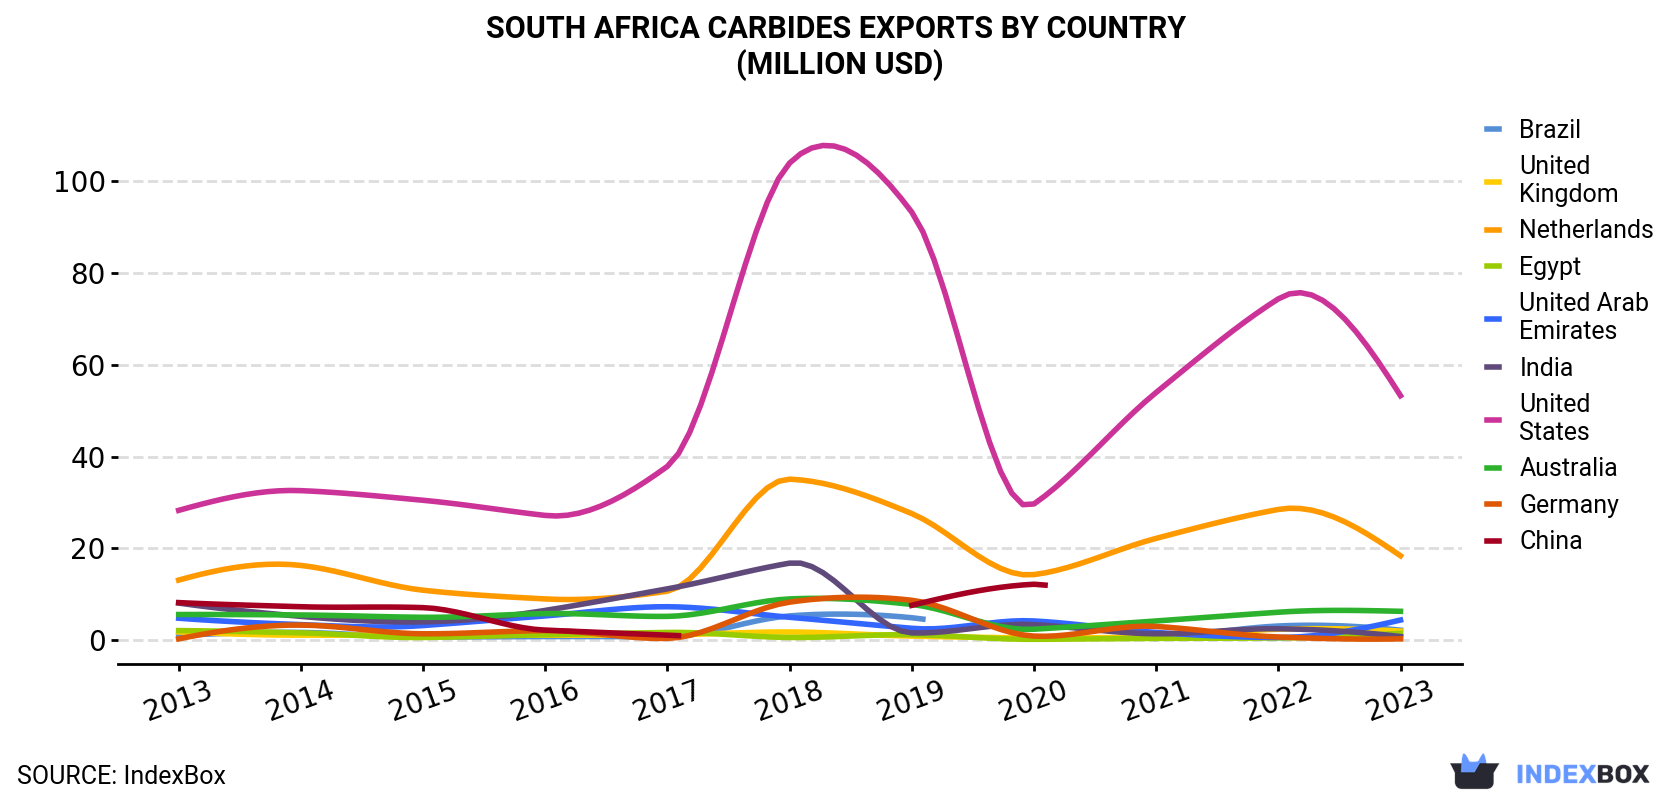 South Africa Carbides Exports By Country (Million USD)